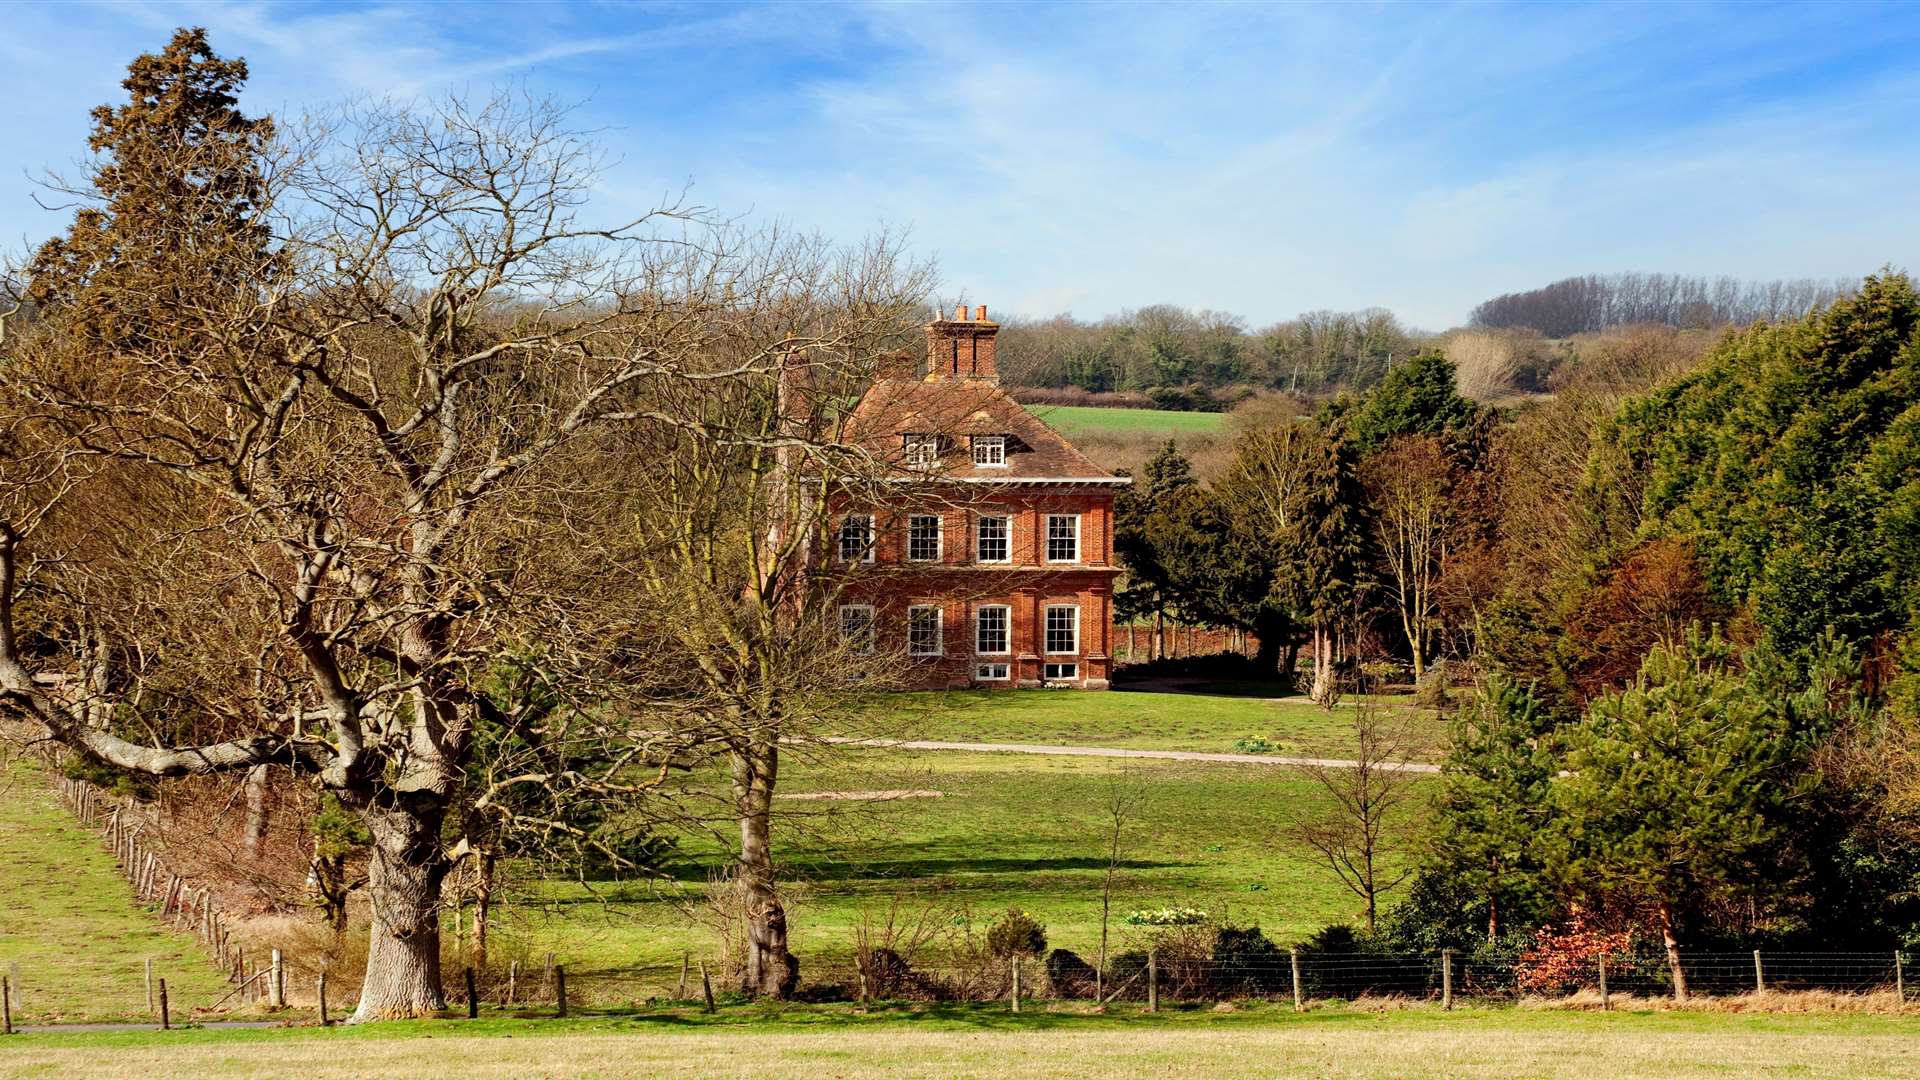 Bridge Place Manor as it looks today